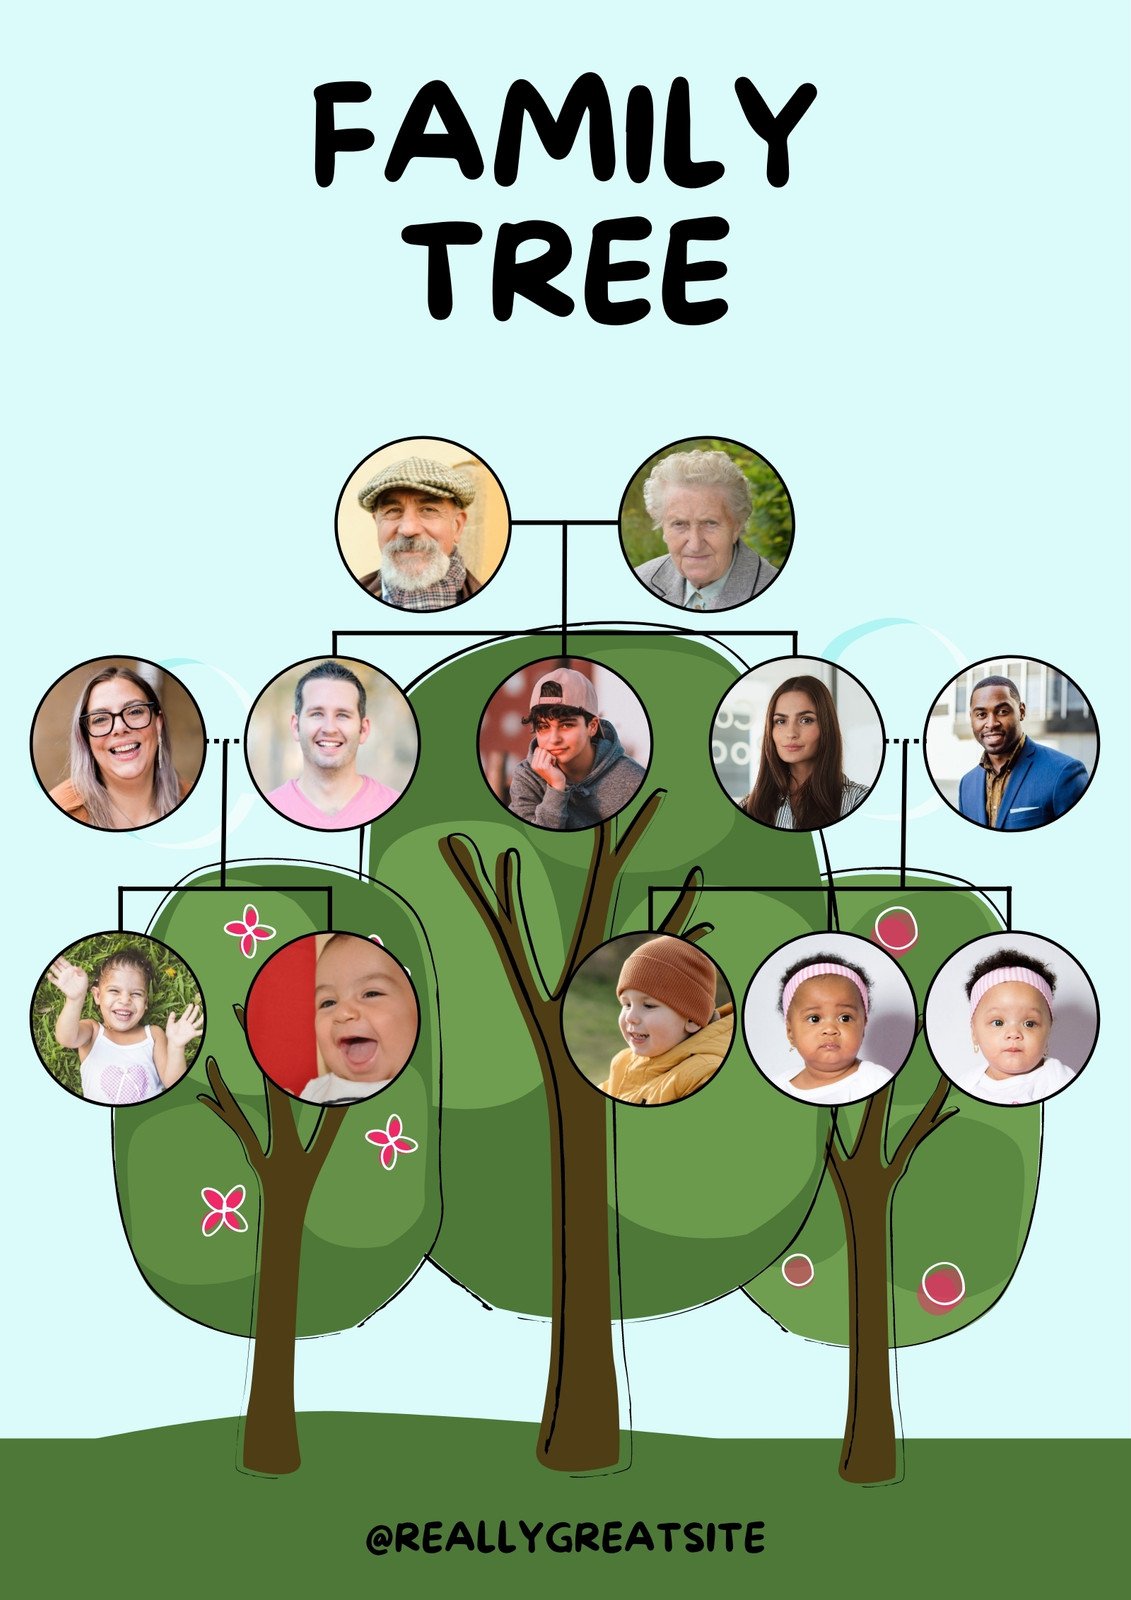 Share more than 150 family tree chart drawing - seven.edu.vn